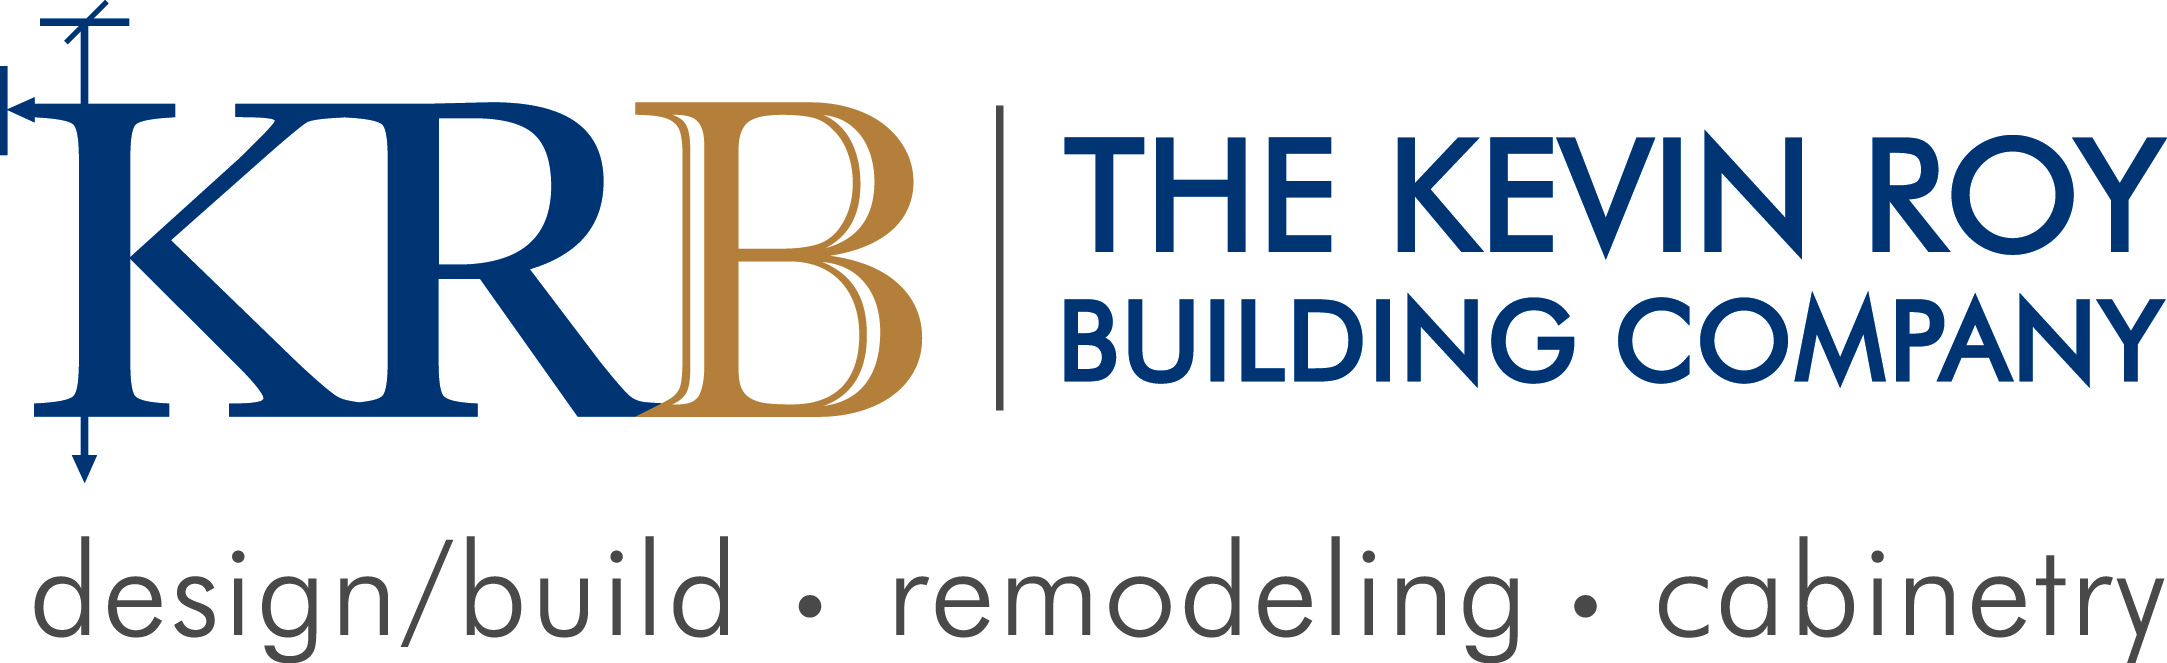 The Kevin Roy Building Company